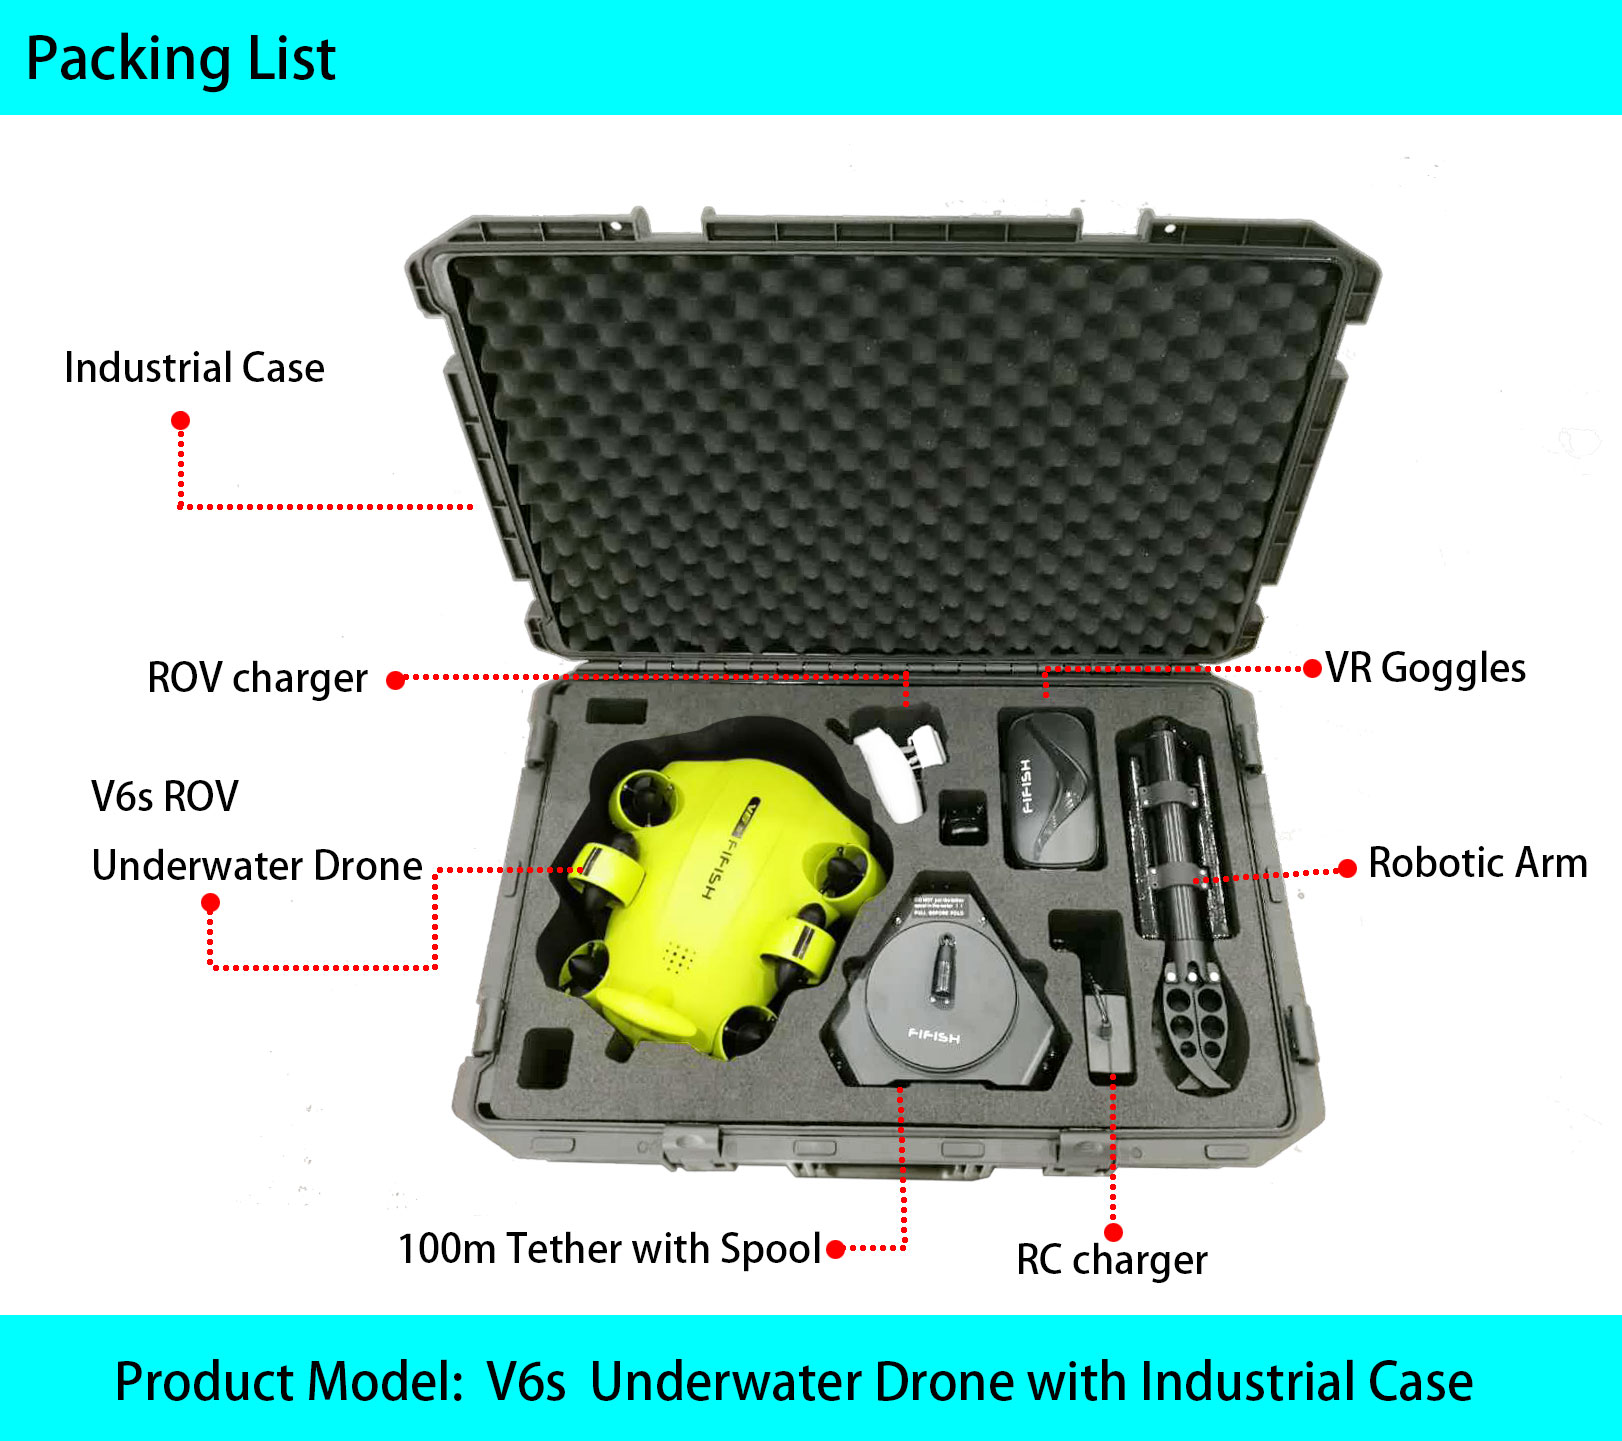 FIFISH V6s Underwater Drone with 4K UHD Camera and Robotic Arm for Underwater Detection,Viewing, Recording, Fishing, Salvage Work